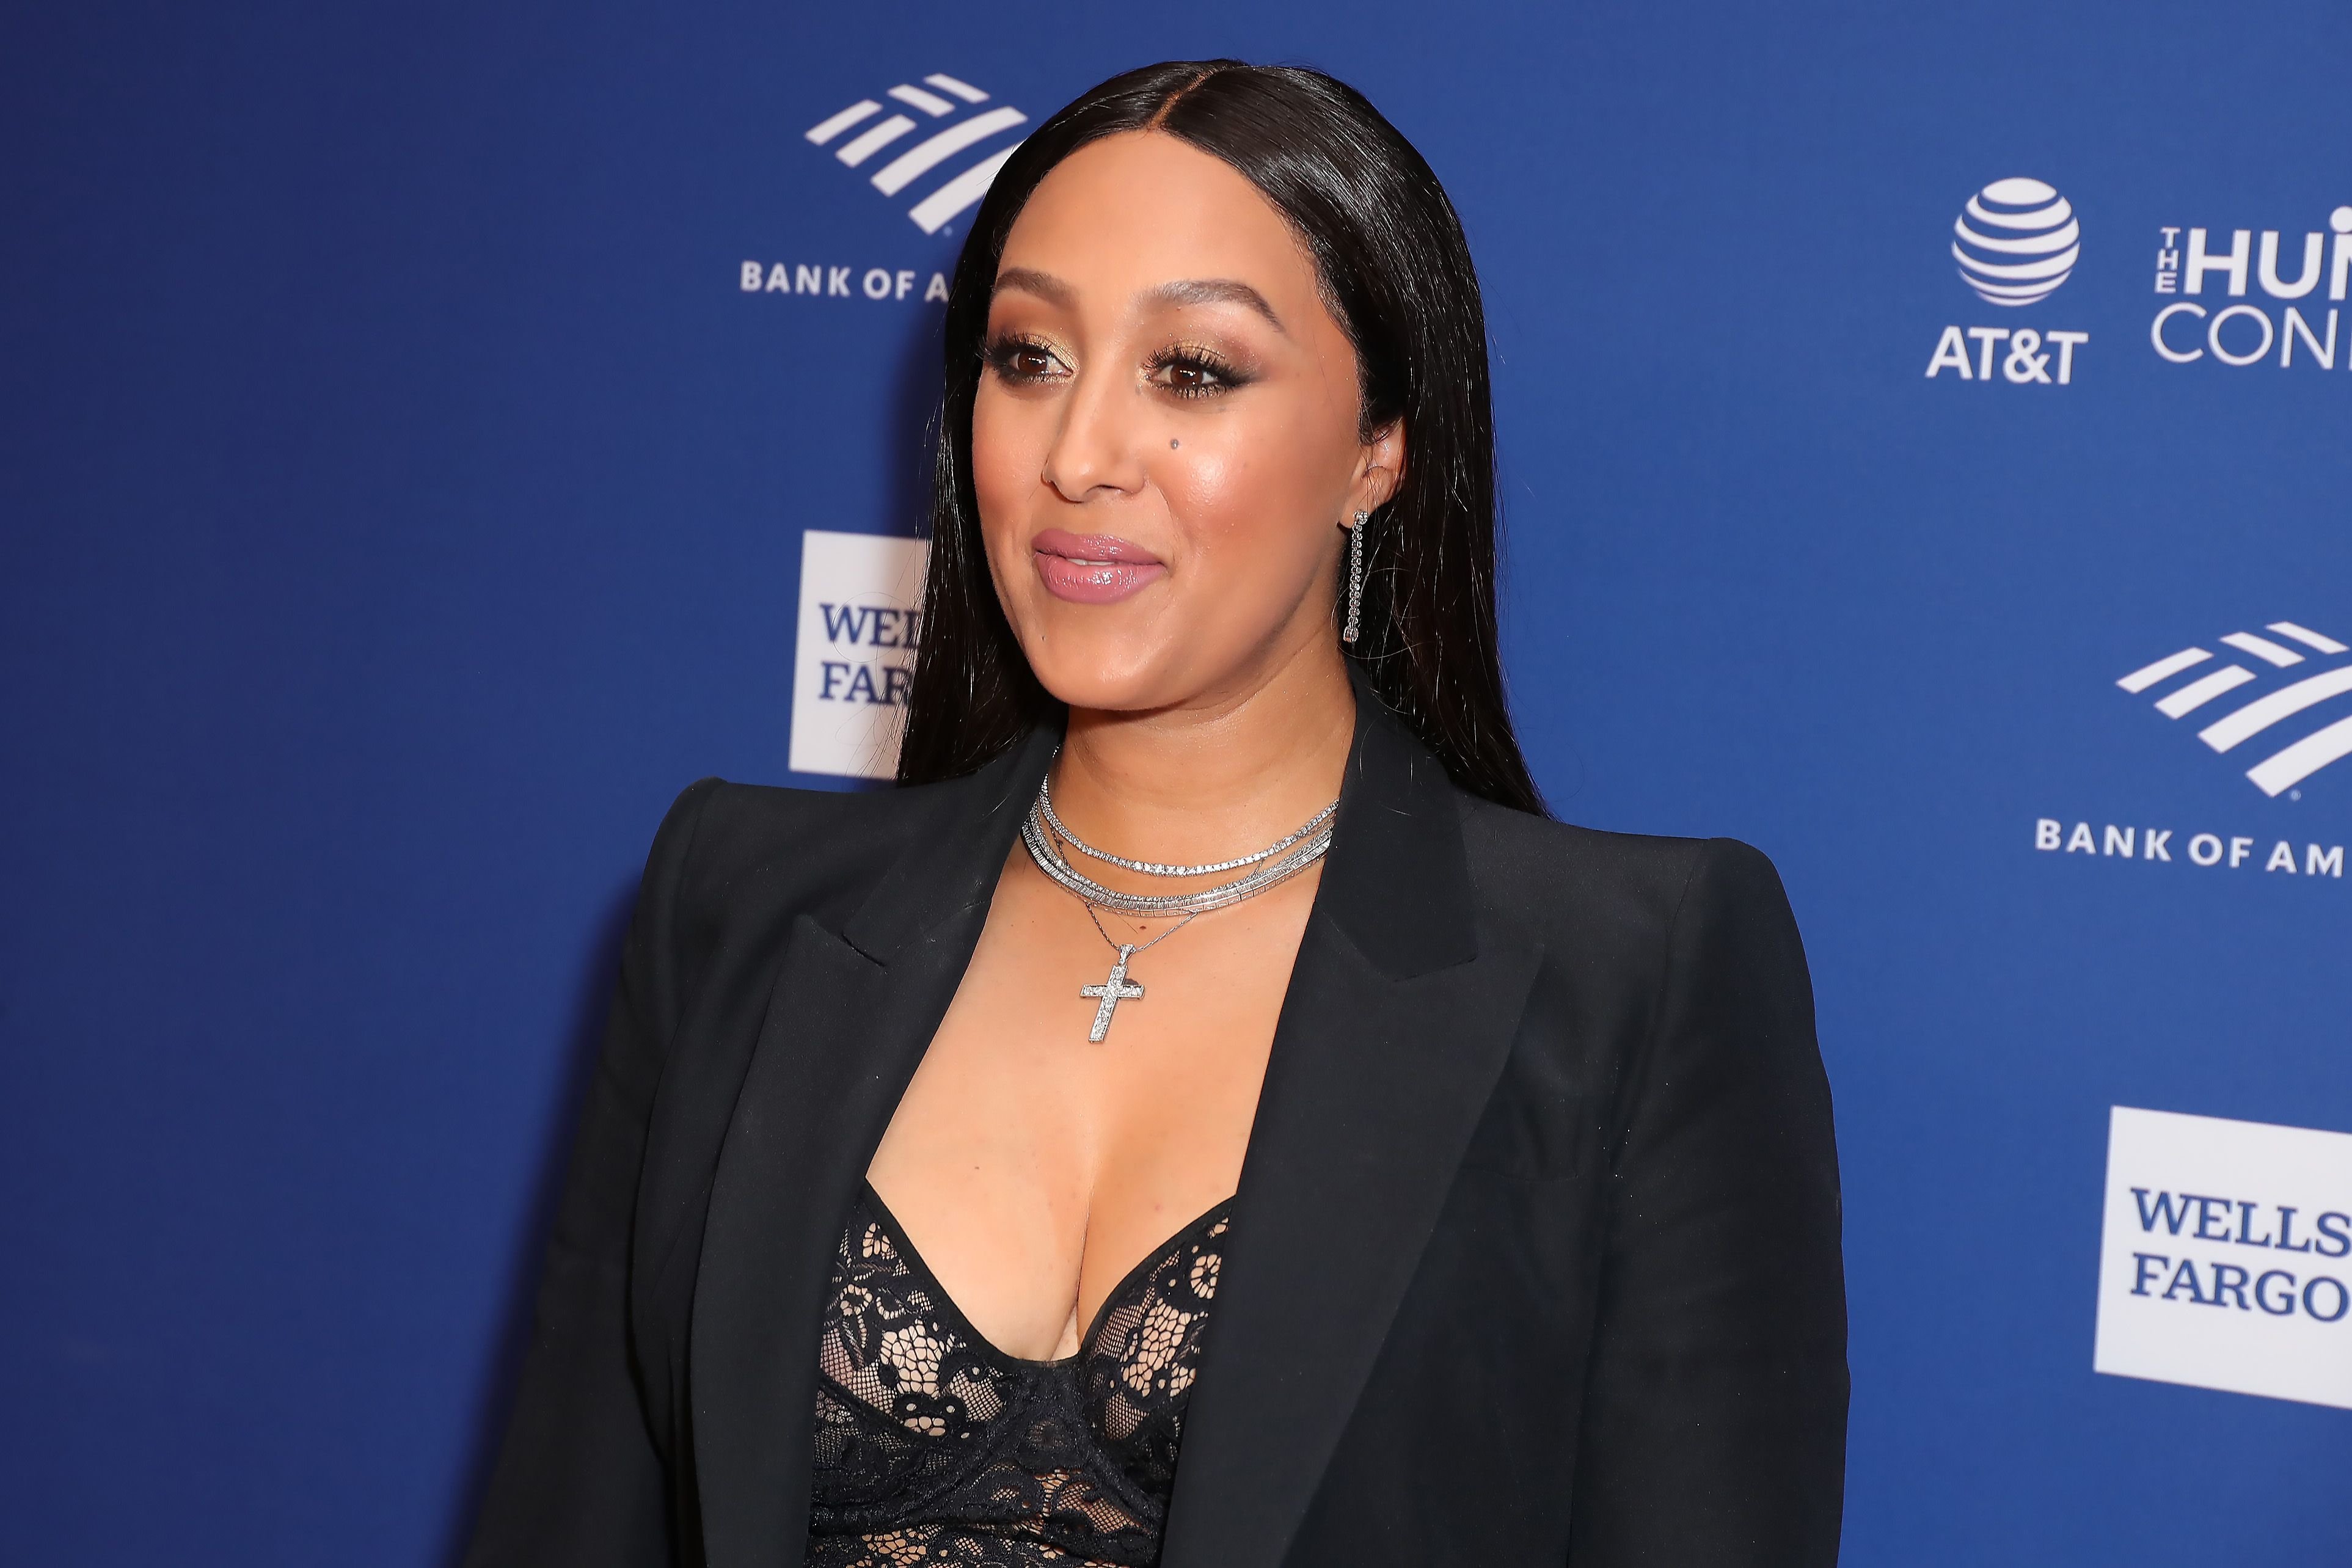 Tamera Mowry-Housley attends the 51st NAACP Image Awards in February 2020 | Photo: Getty Images